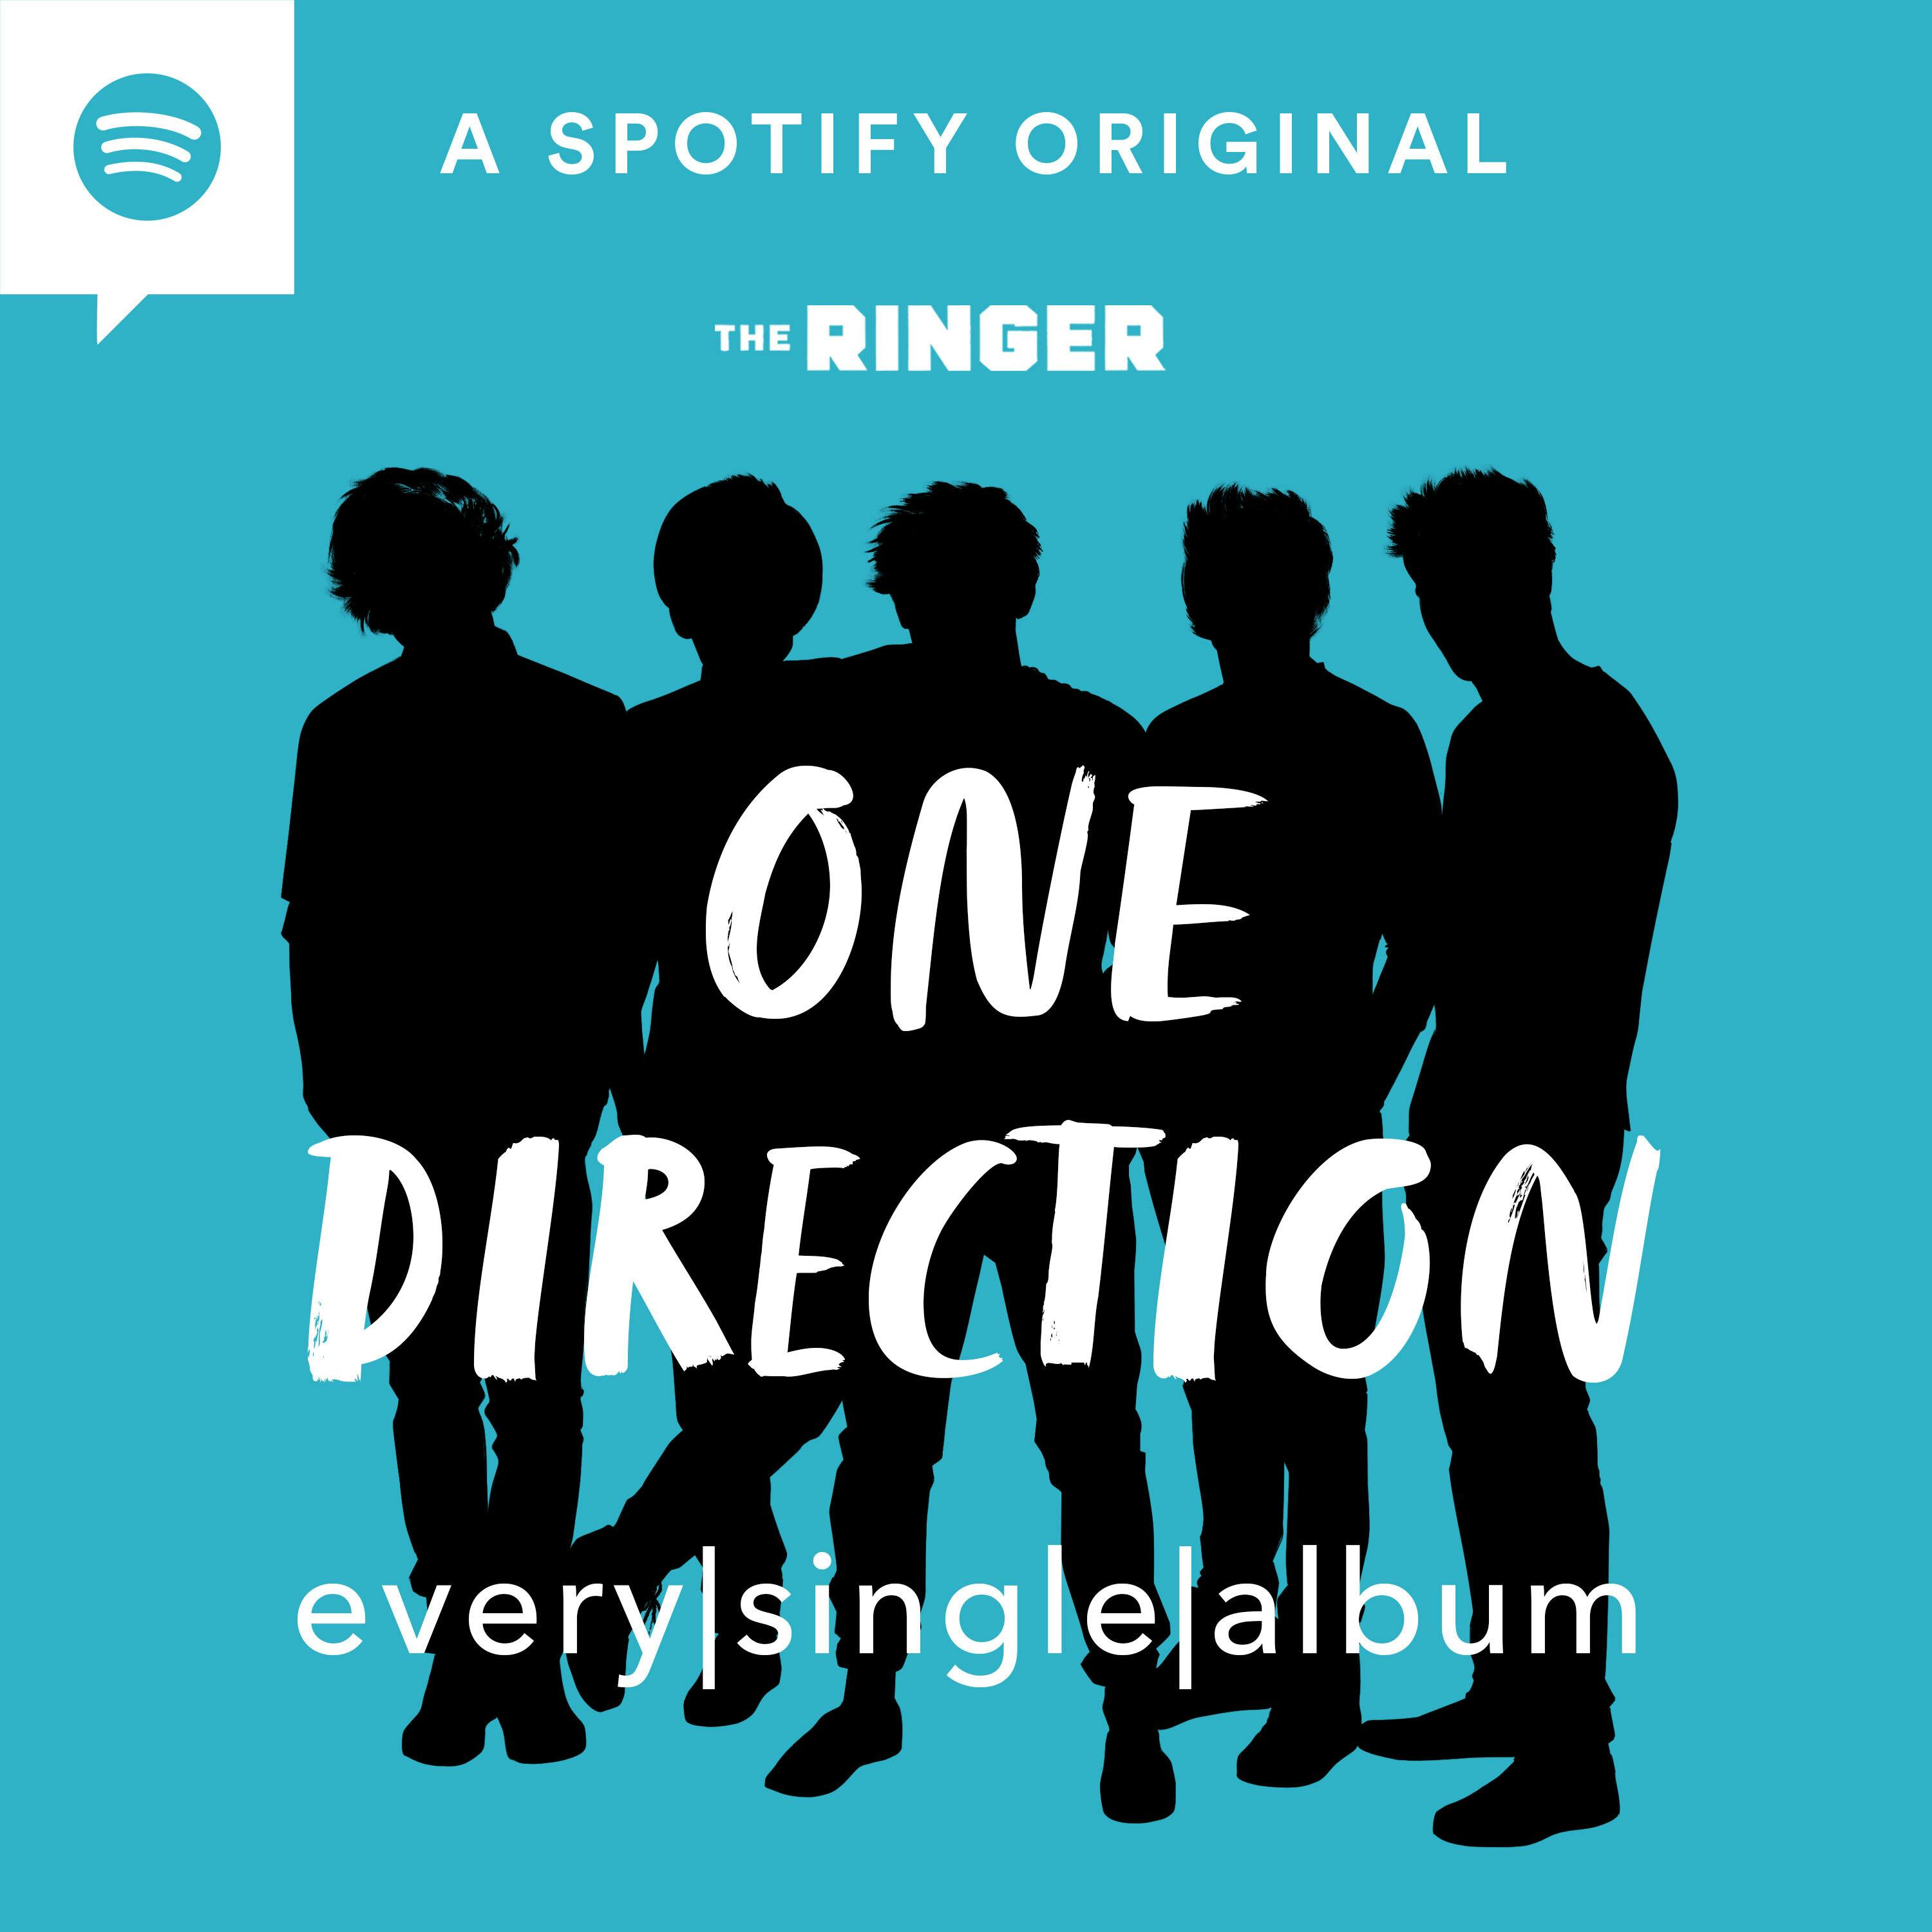 Introducing 'Every Single Album: One Direction'